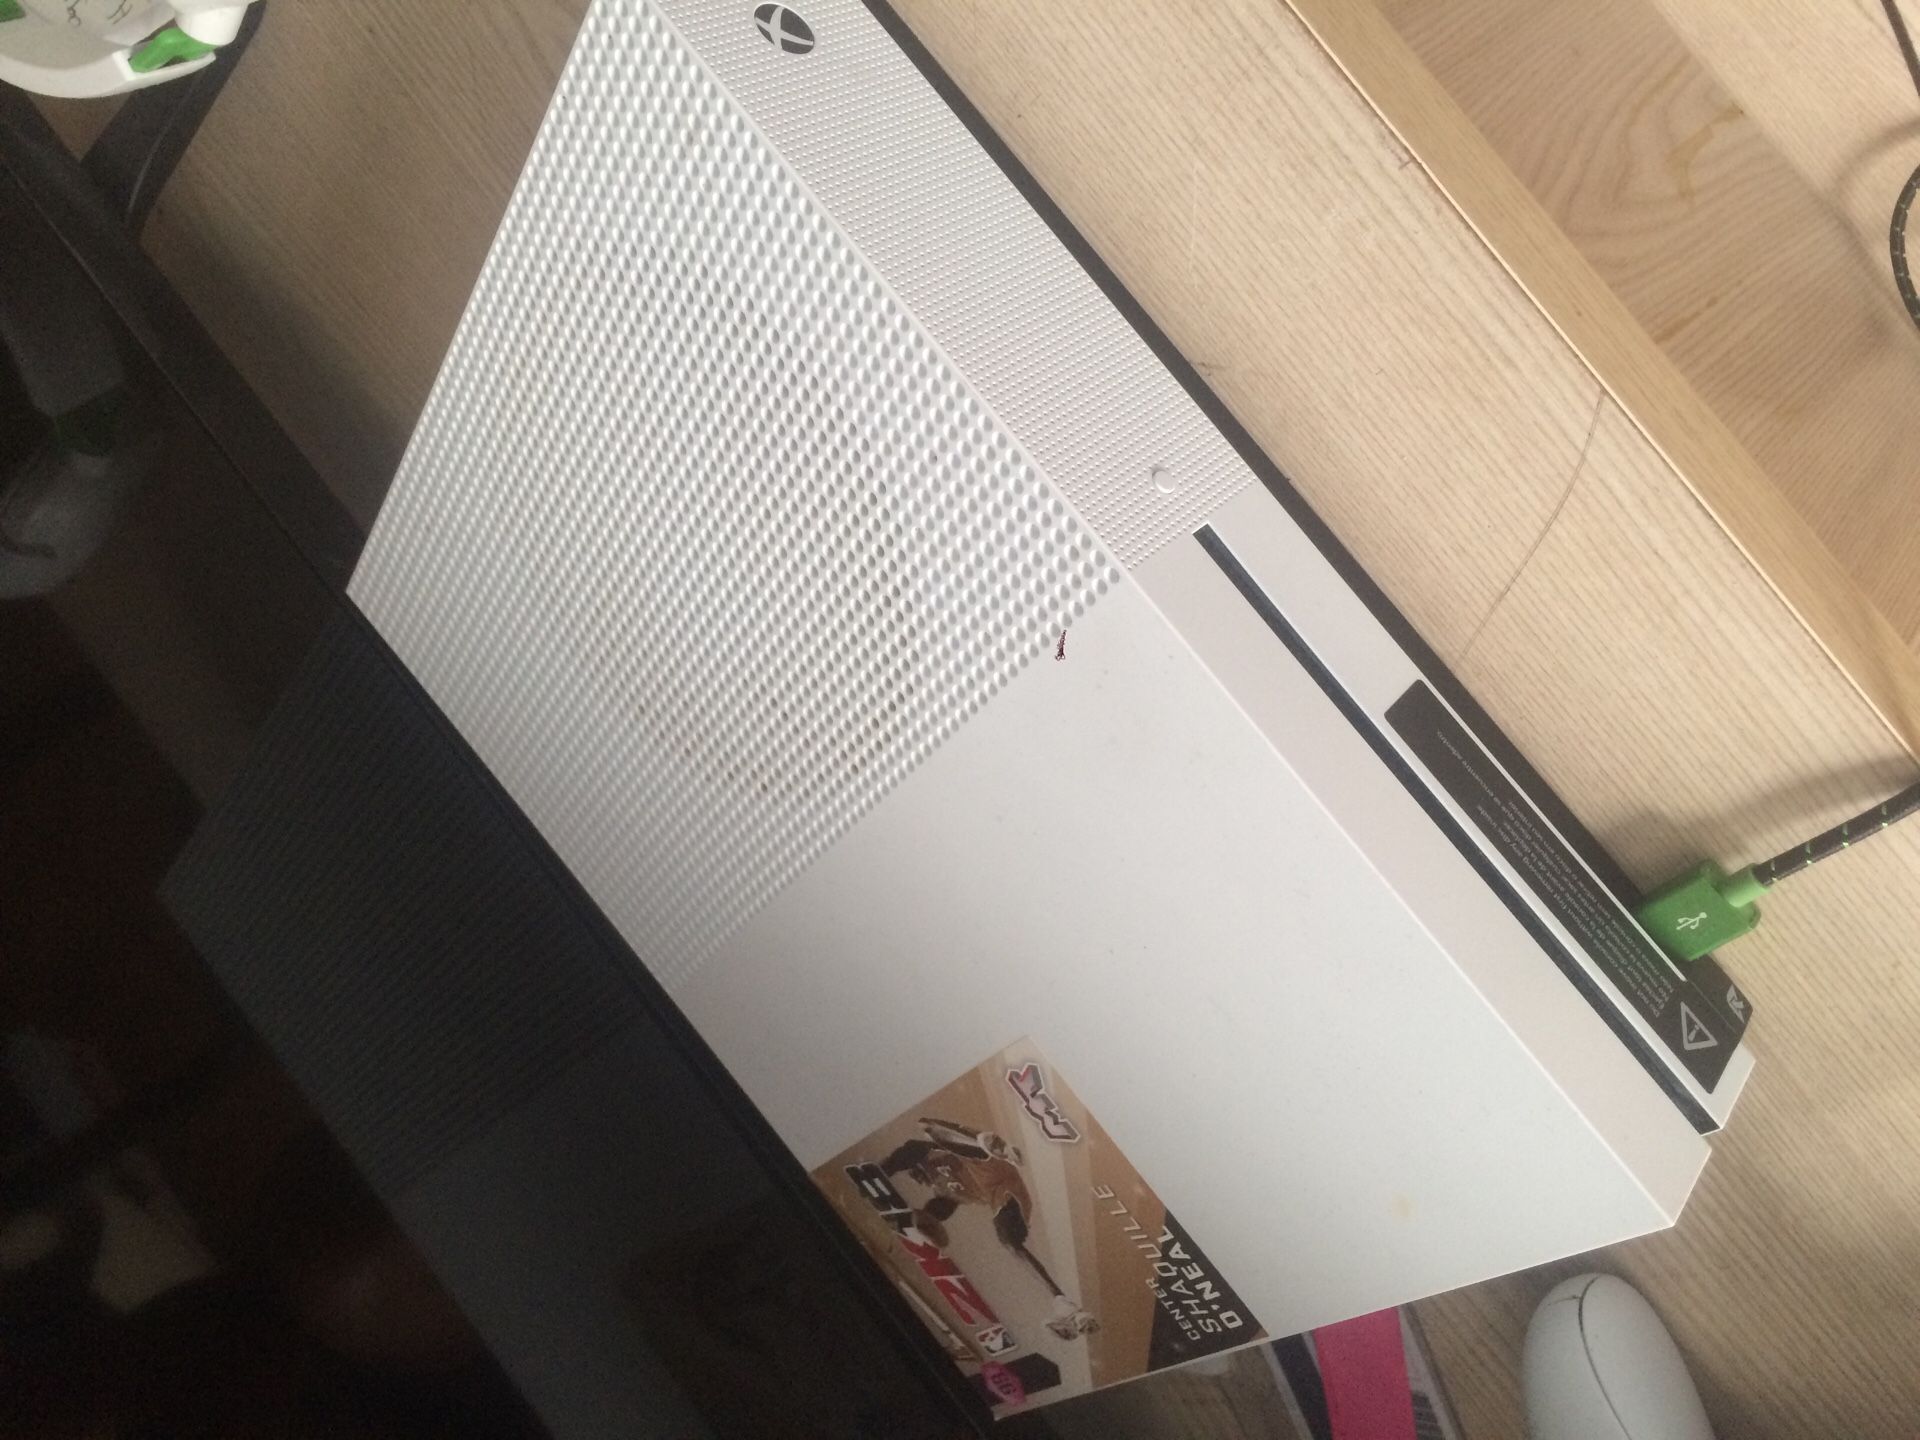 Xbox one S with headset,controller & multiple games